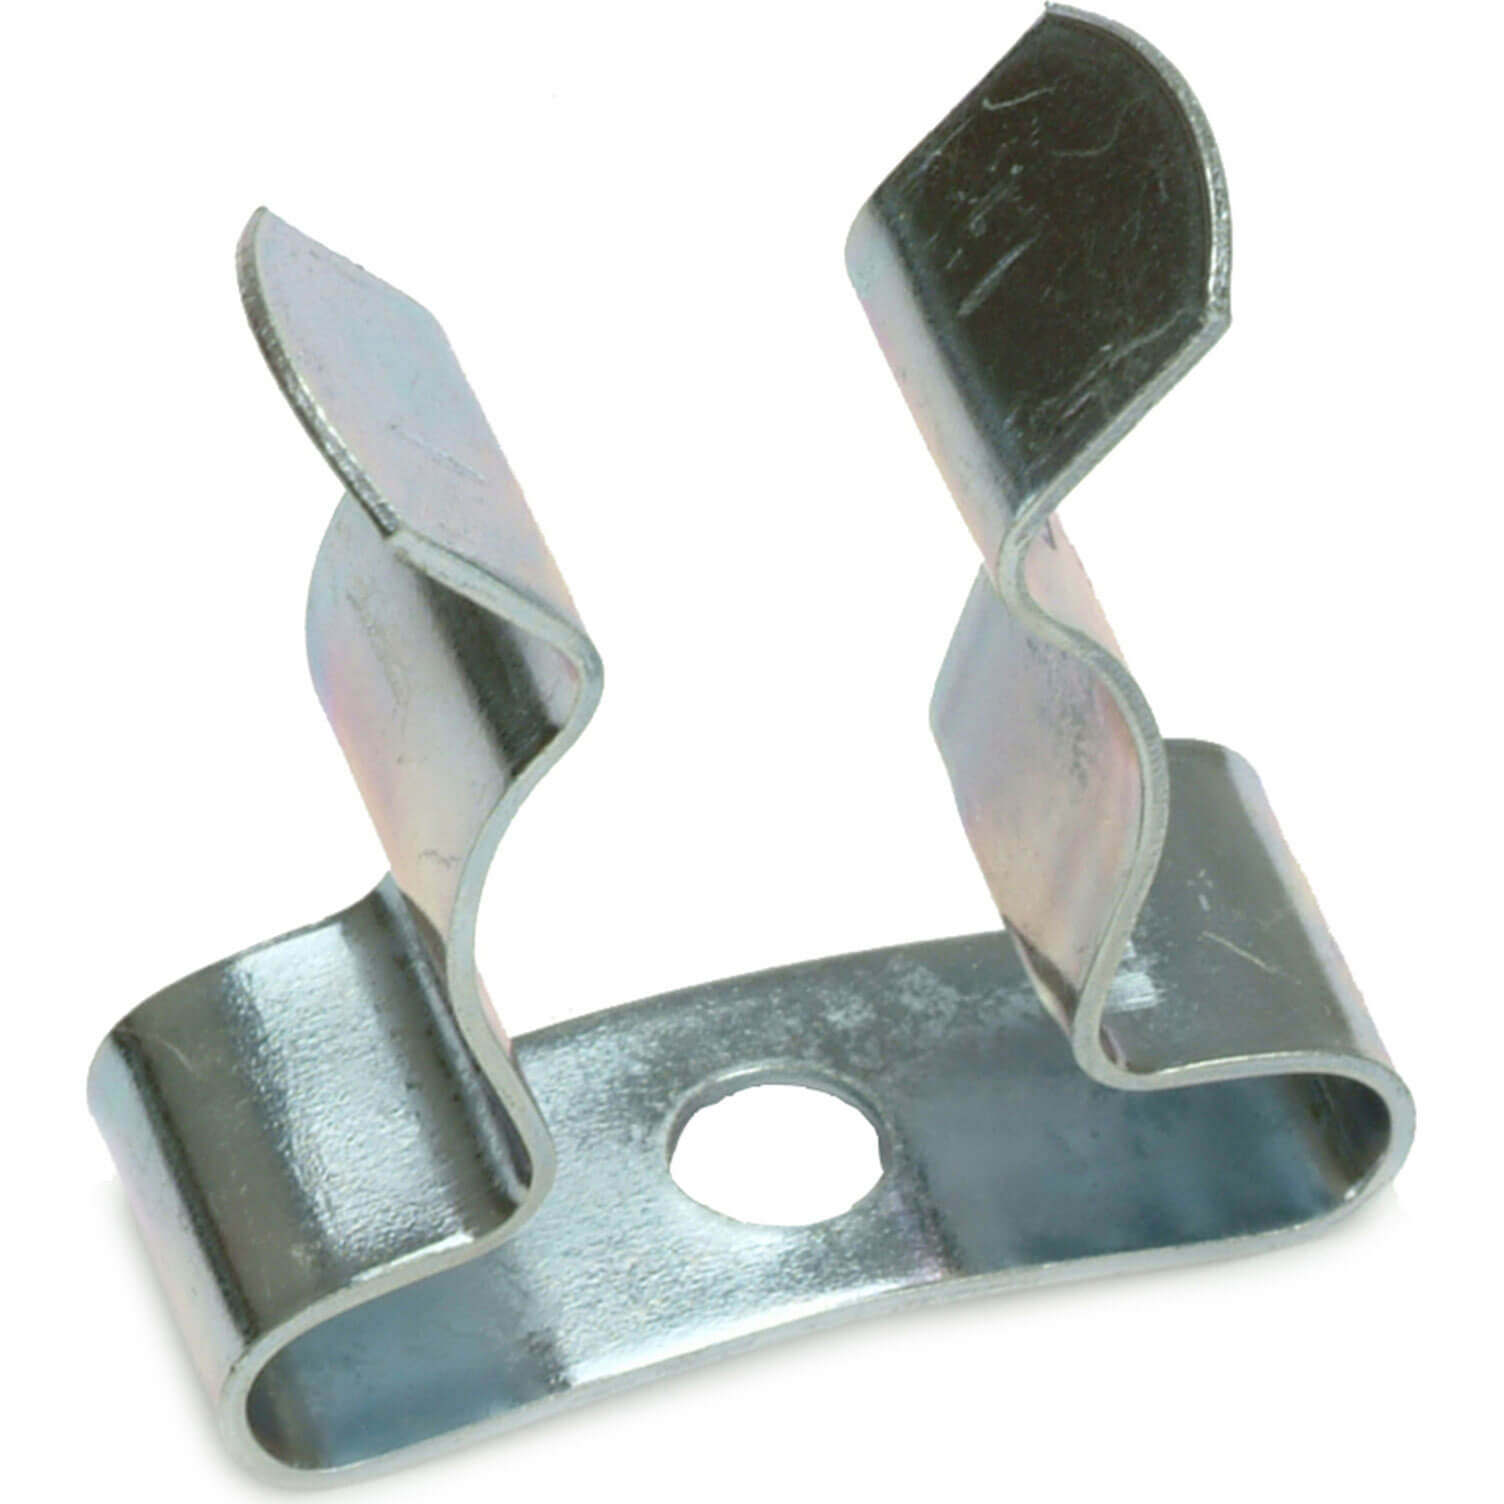 Image of Heartbeat Spring Steel Tool Retaining Clips 10mm Pack of 25